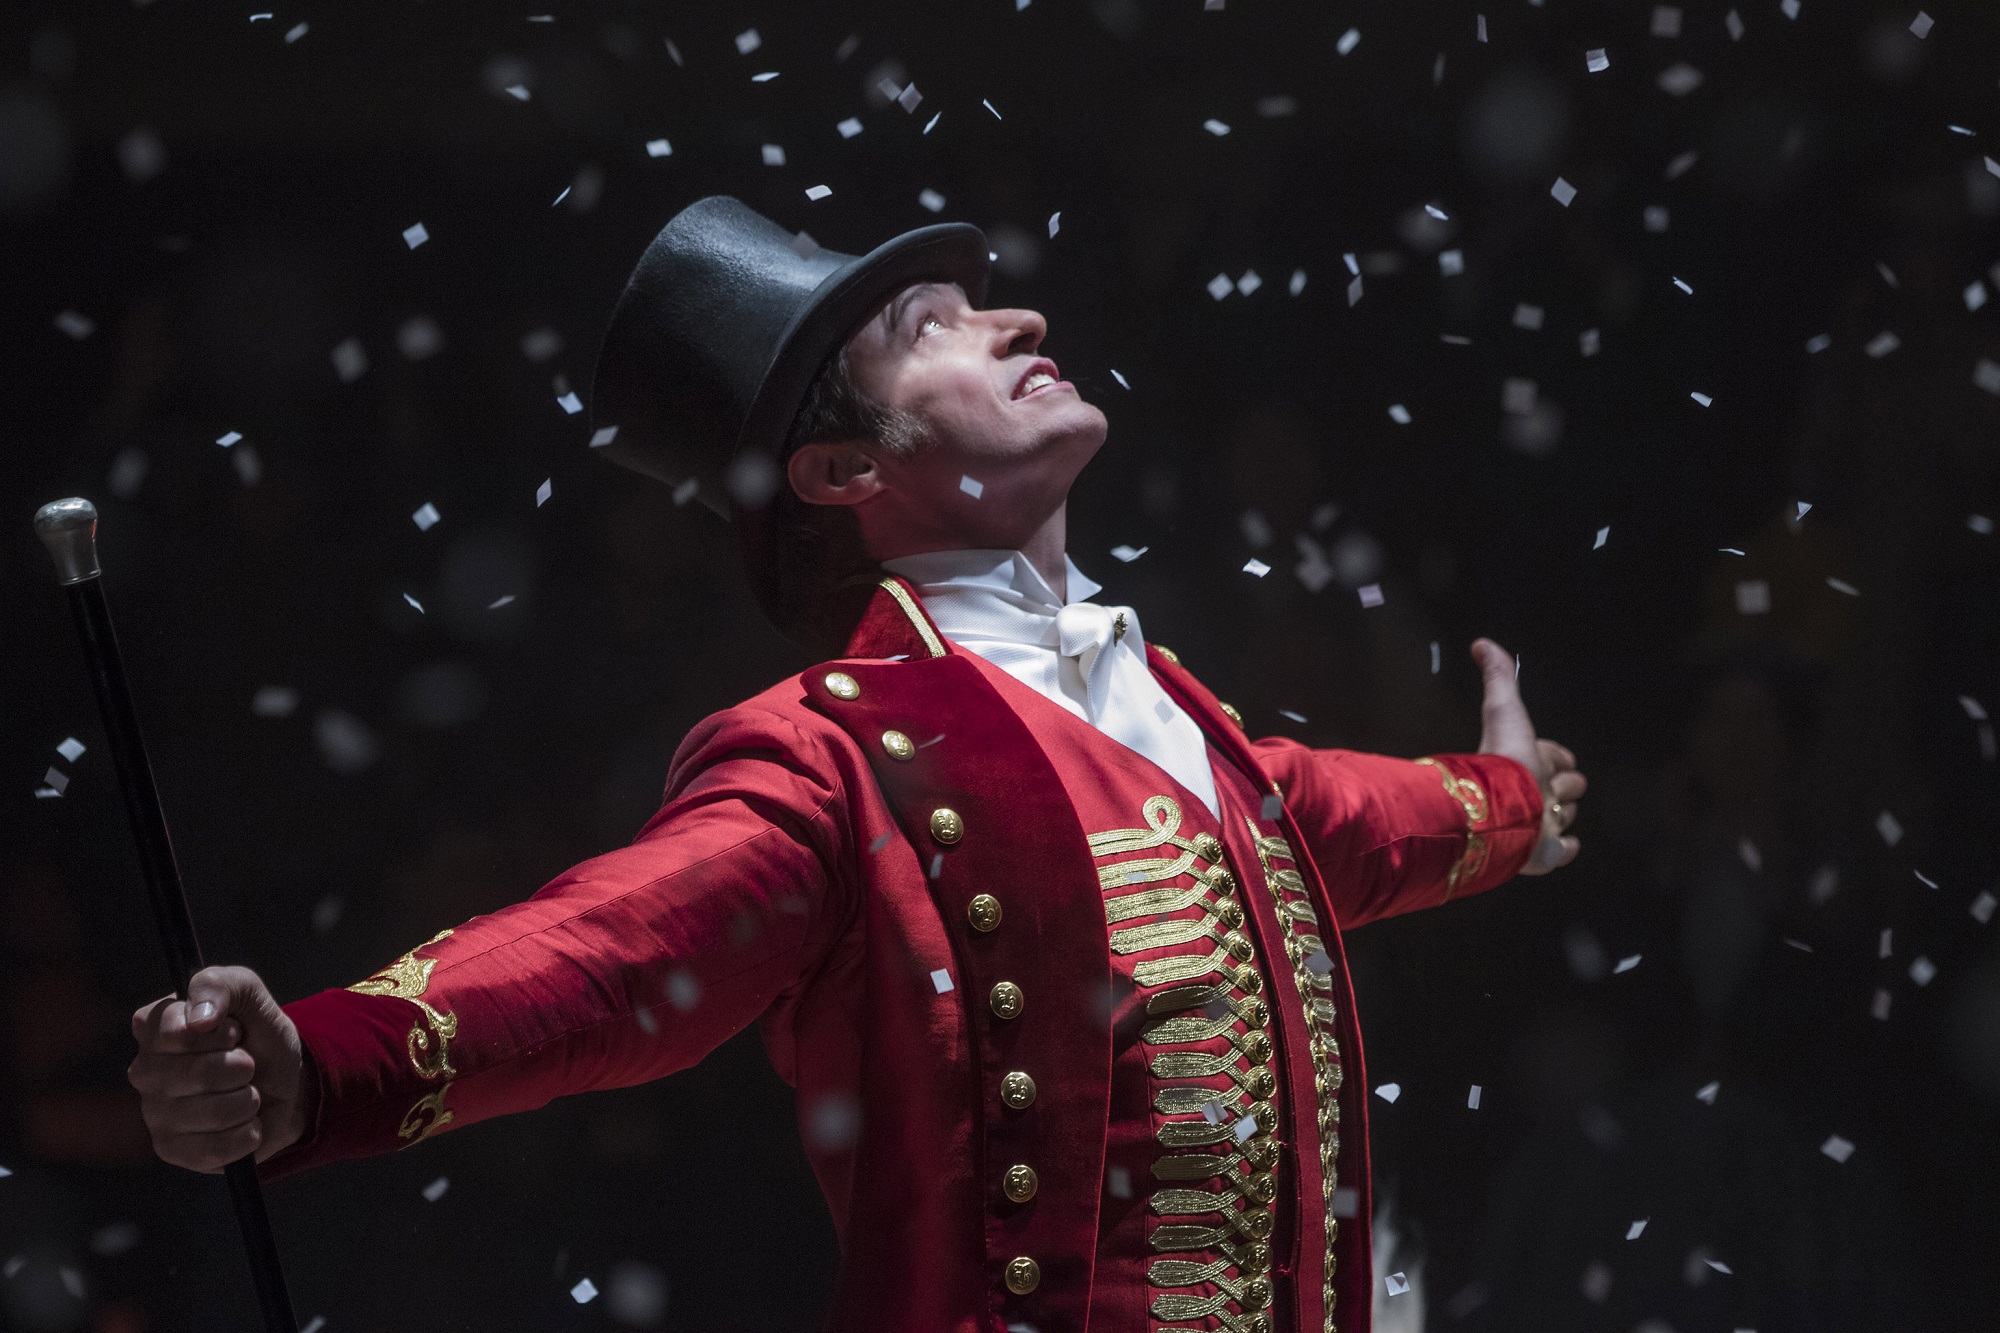 “THE GREATEST SHOWMAN”, how can something so wrong feel so right